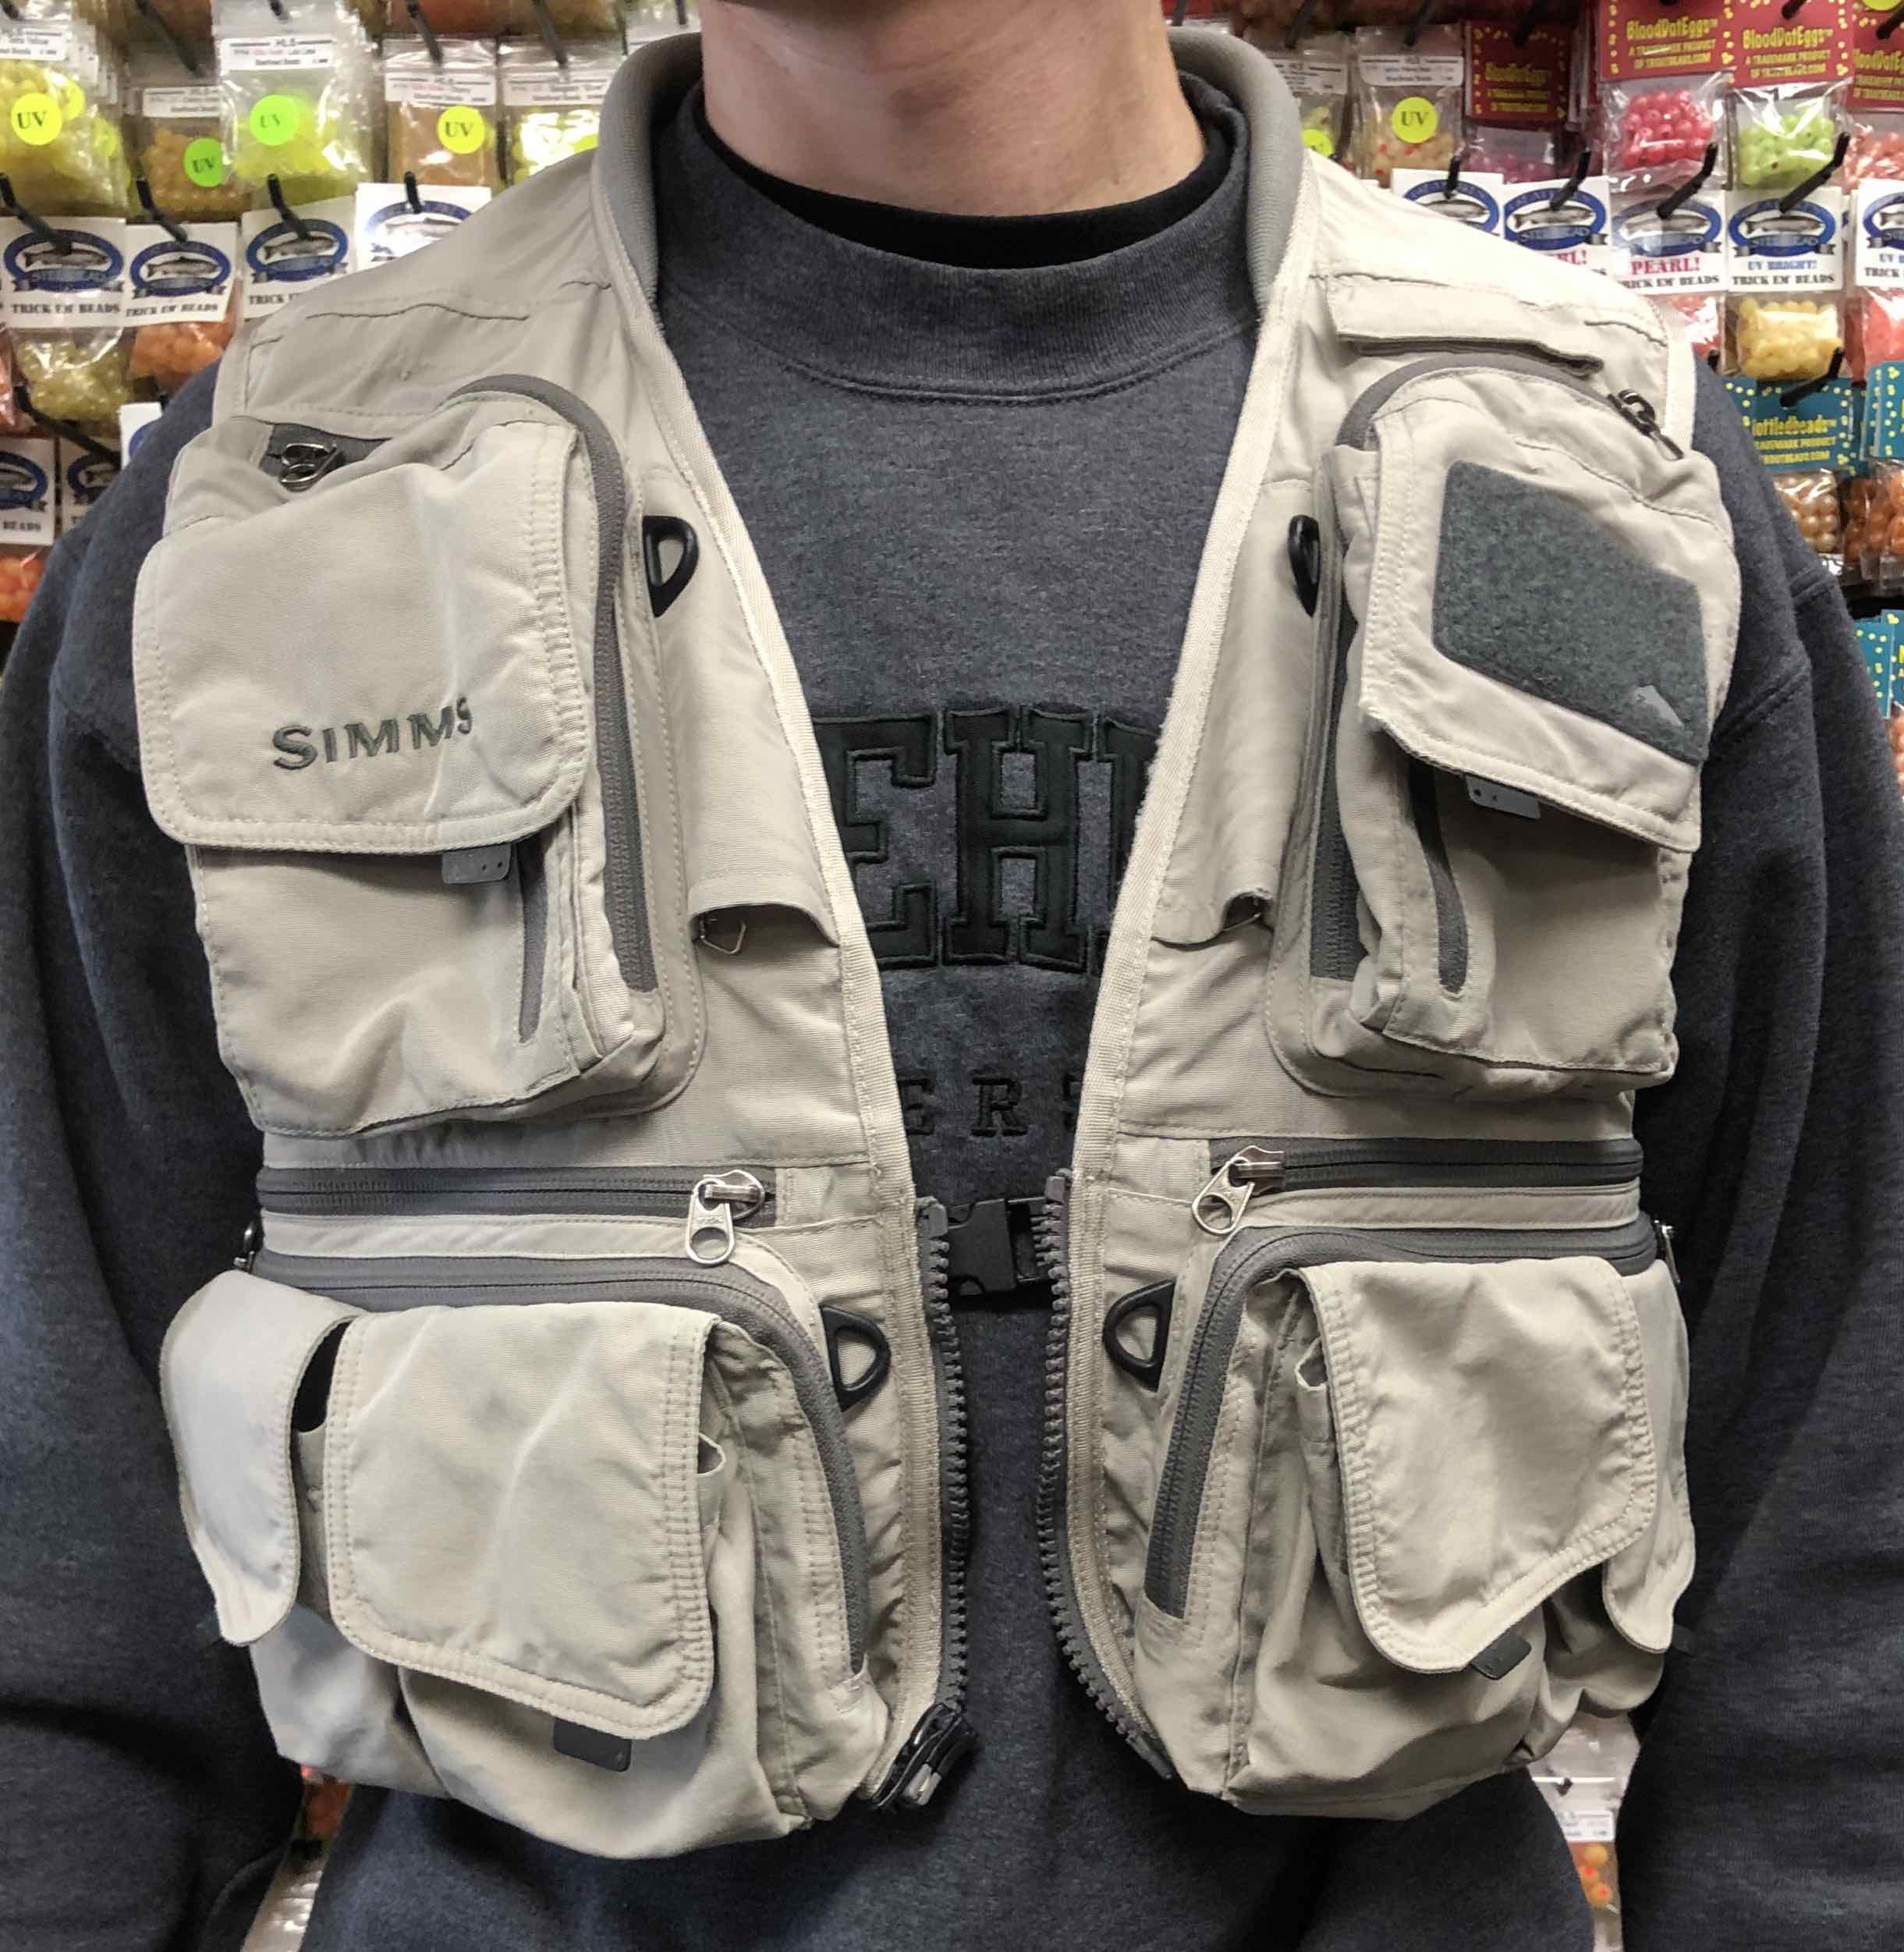 SOLD! – NEW PRICE! – Simms G3 Guide Vest – Size Small – GREAT